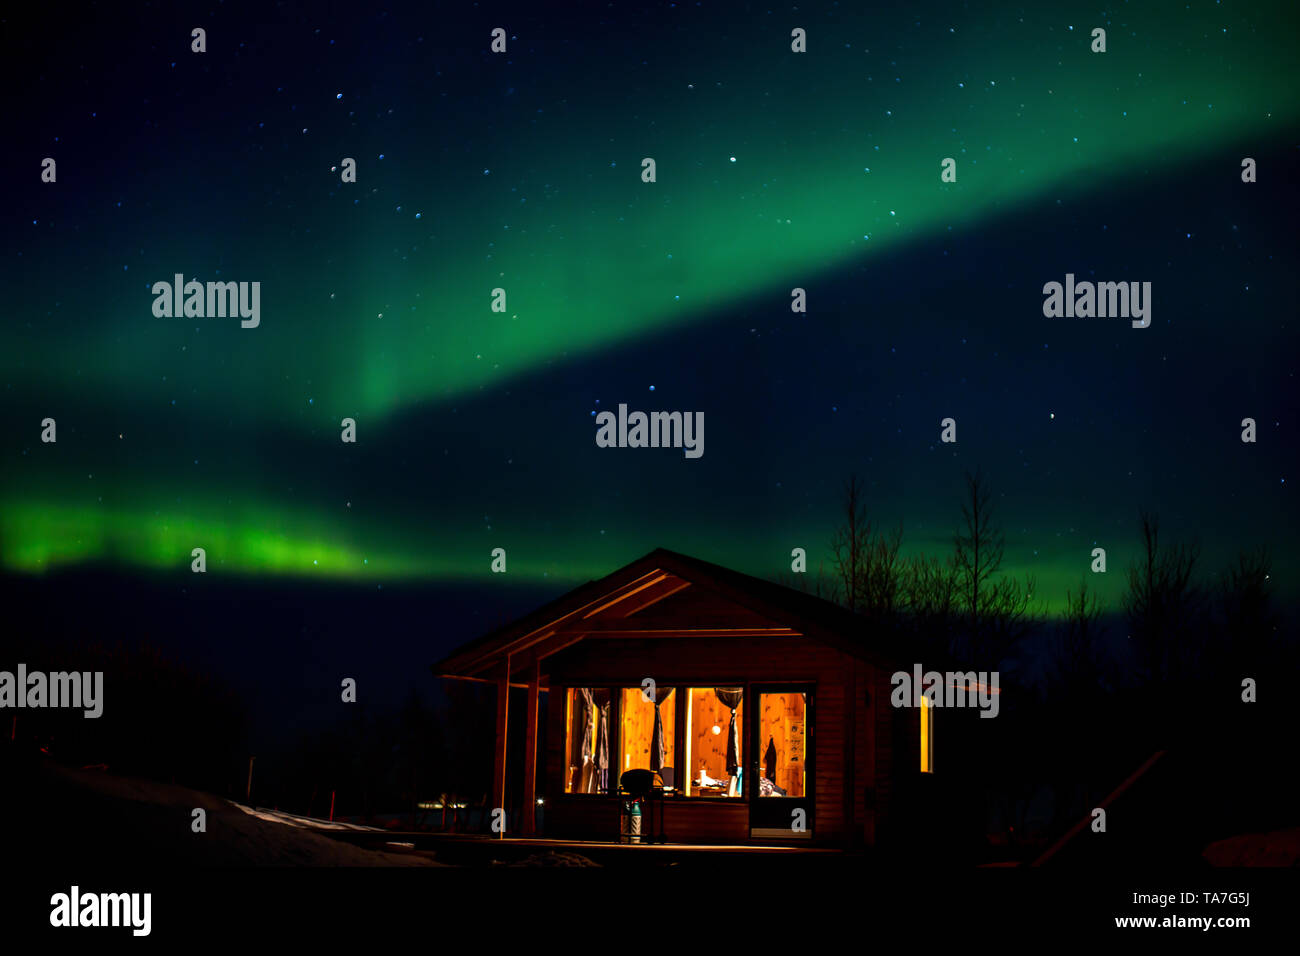 Dancing polar lighDancing polar lights with bungalow in the foreground in winter in Icelandts, bungalow the foreground Stock Photo